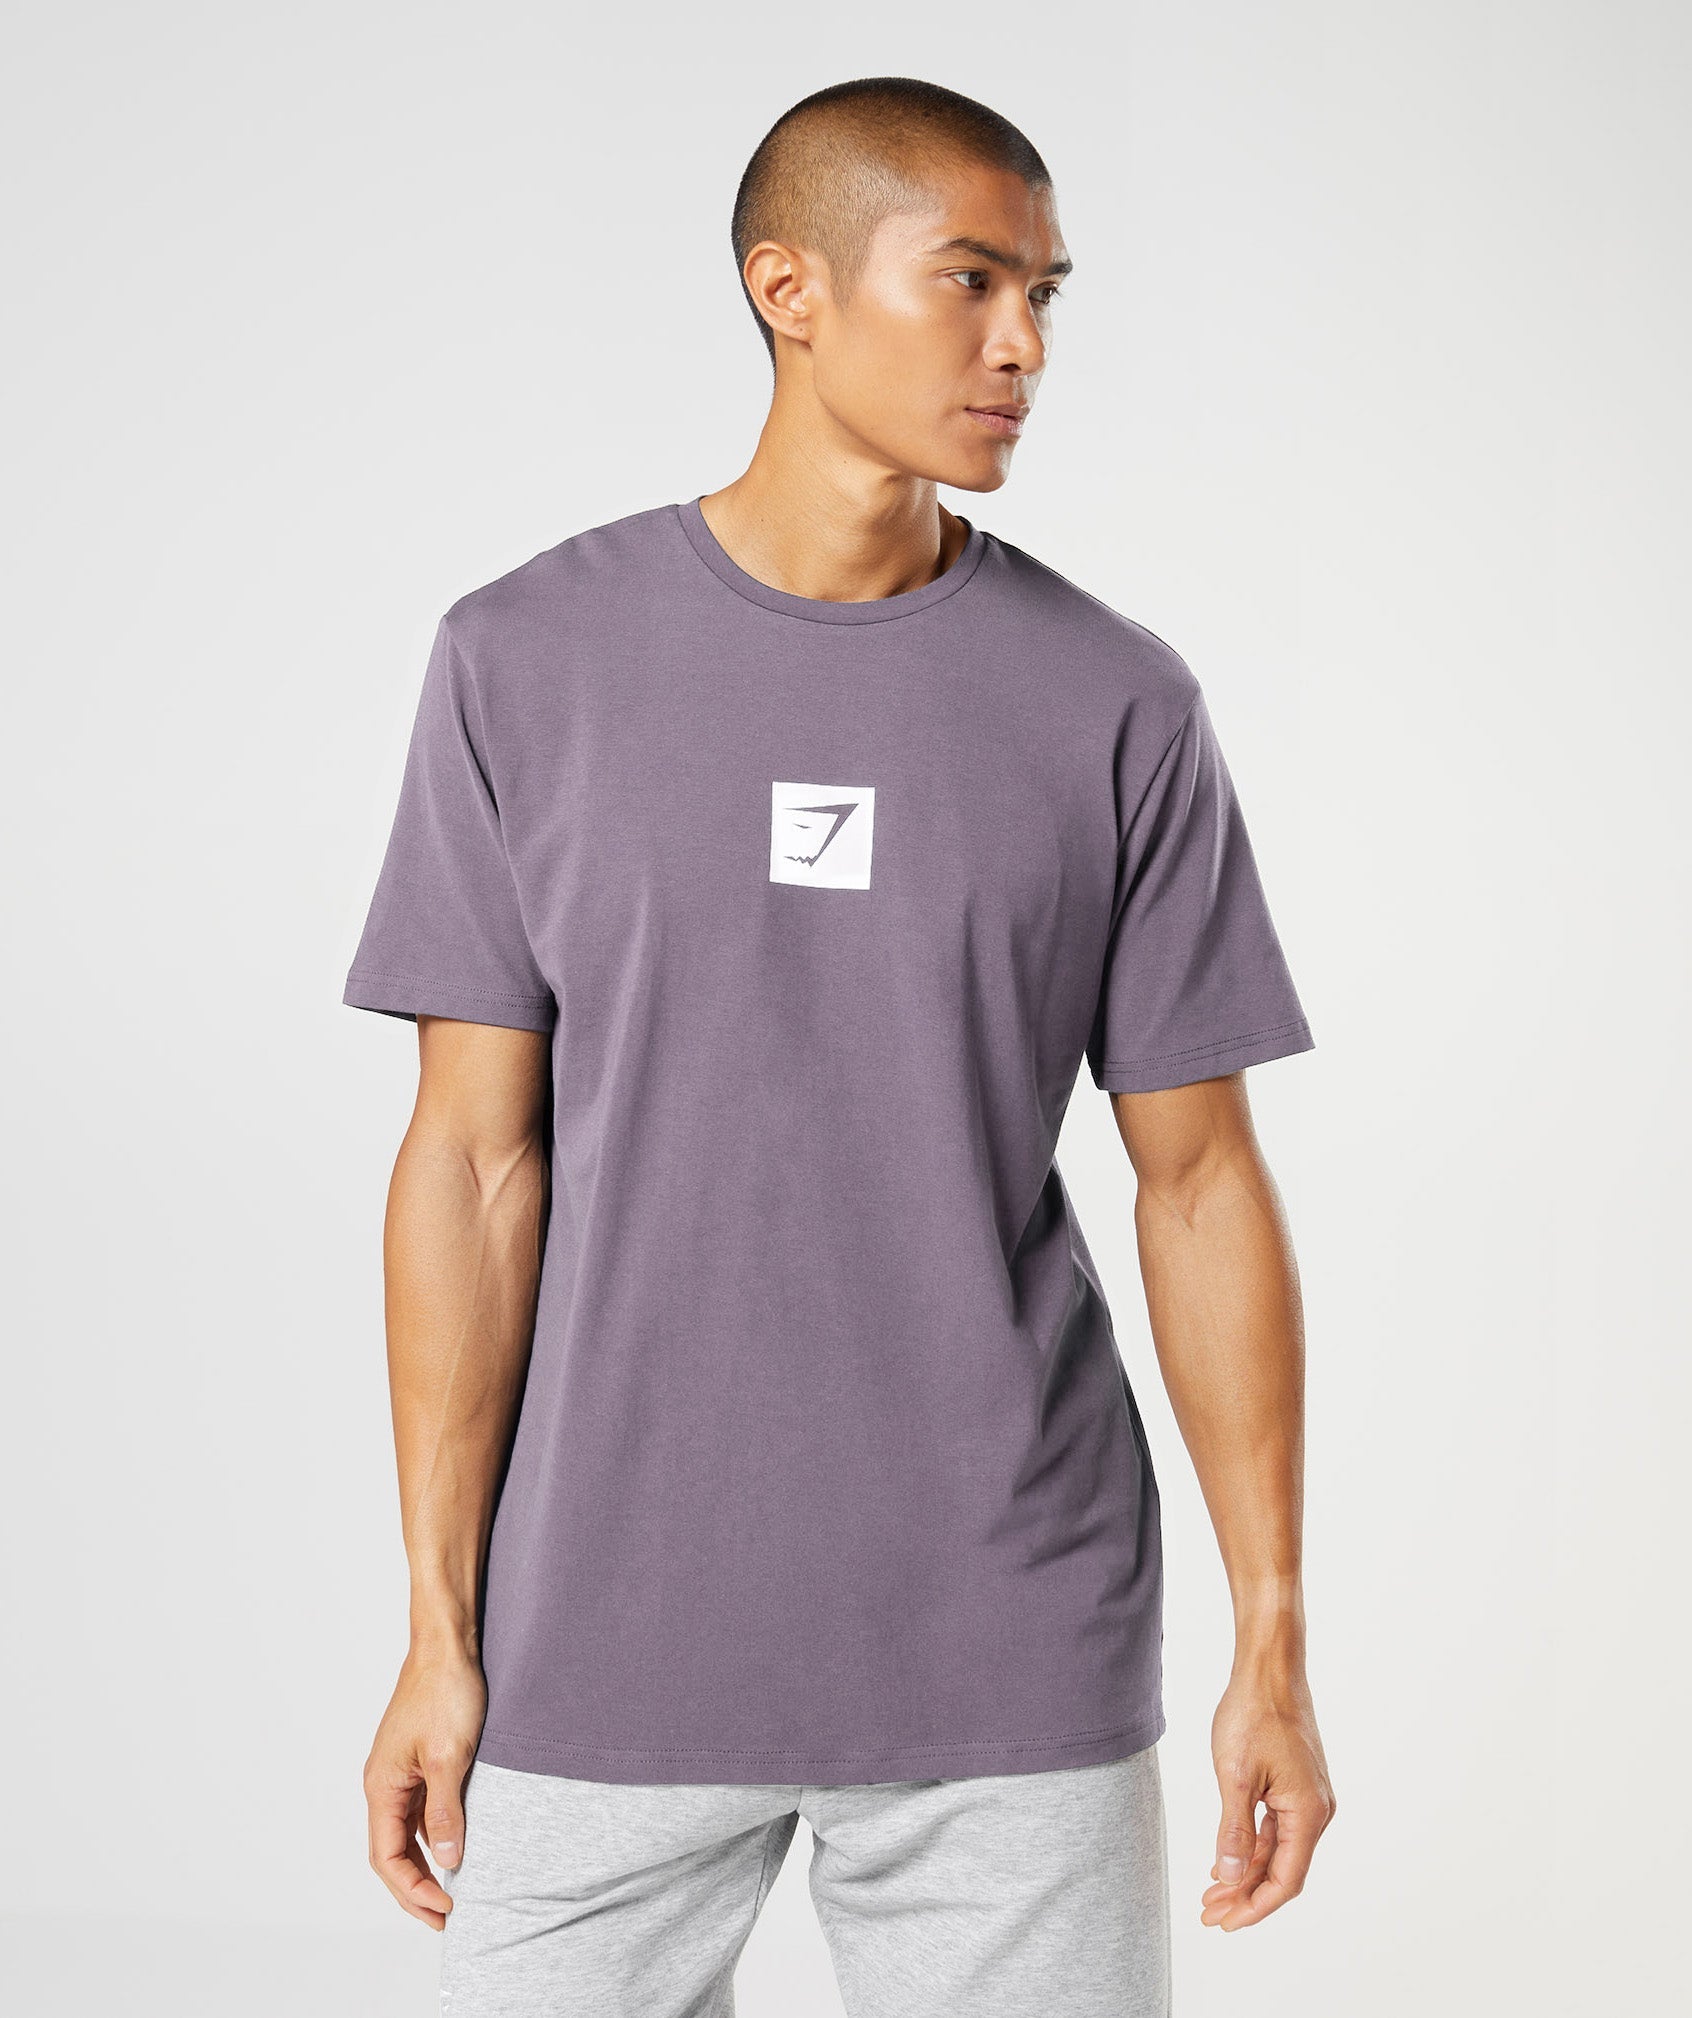 Outline T-Shirt in Musk Lilac - view 1